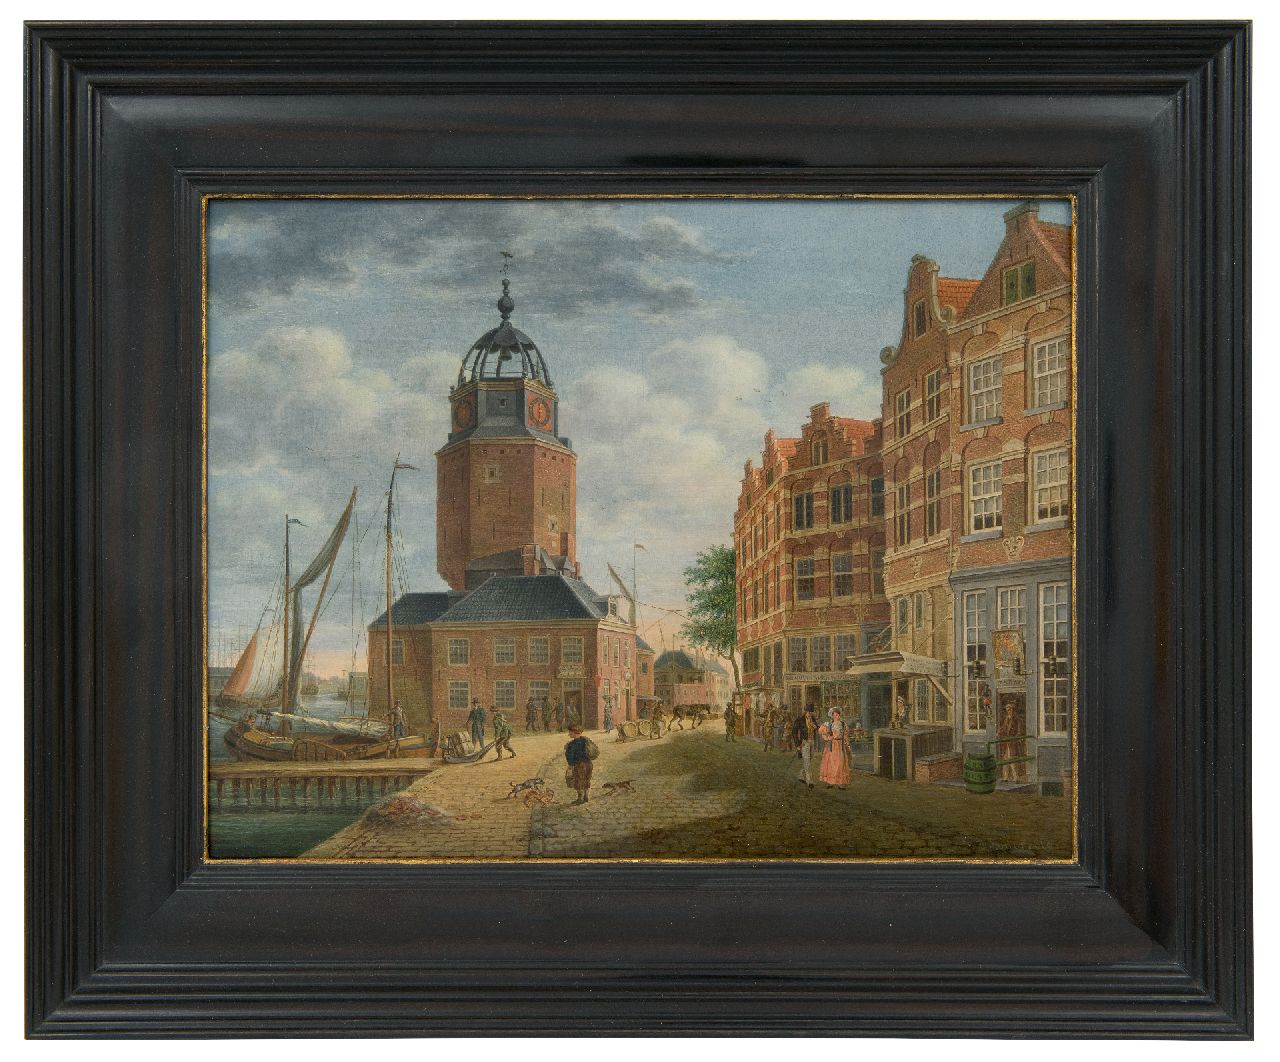 Zijderveld W.  | Willem Zijderveld | Paintings offered for sale | Townscape with quay and inner harbor, oil on panel 25.6 x 33.2 cm, signed l.r.